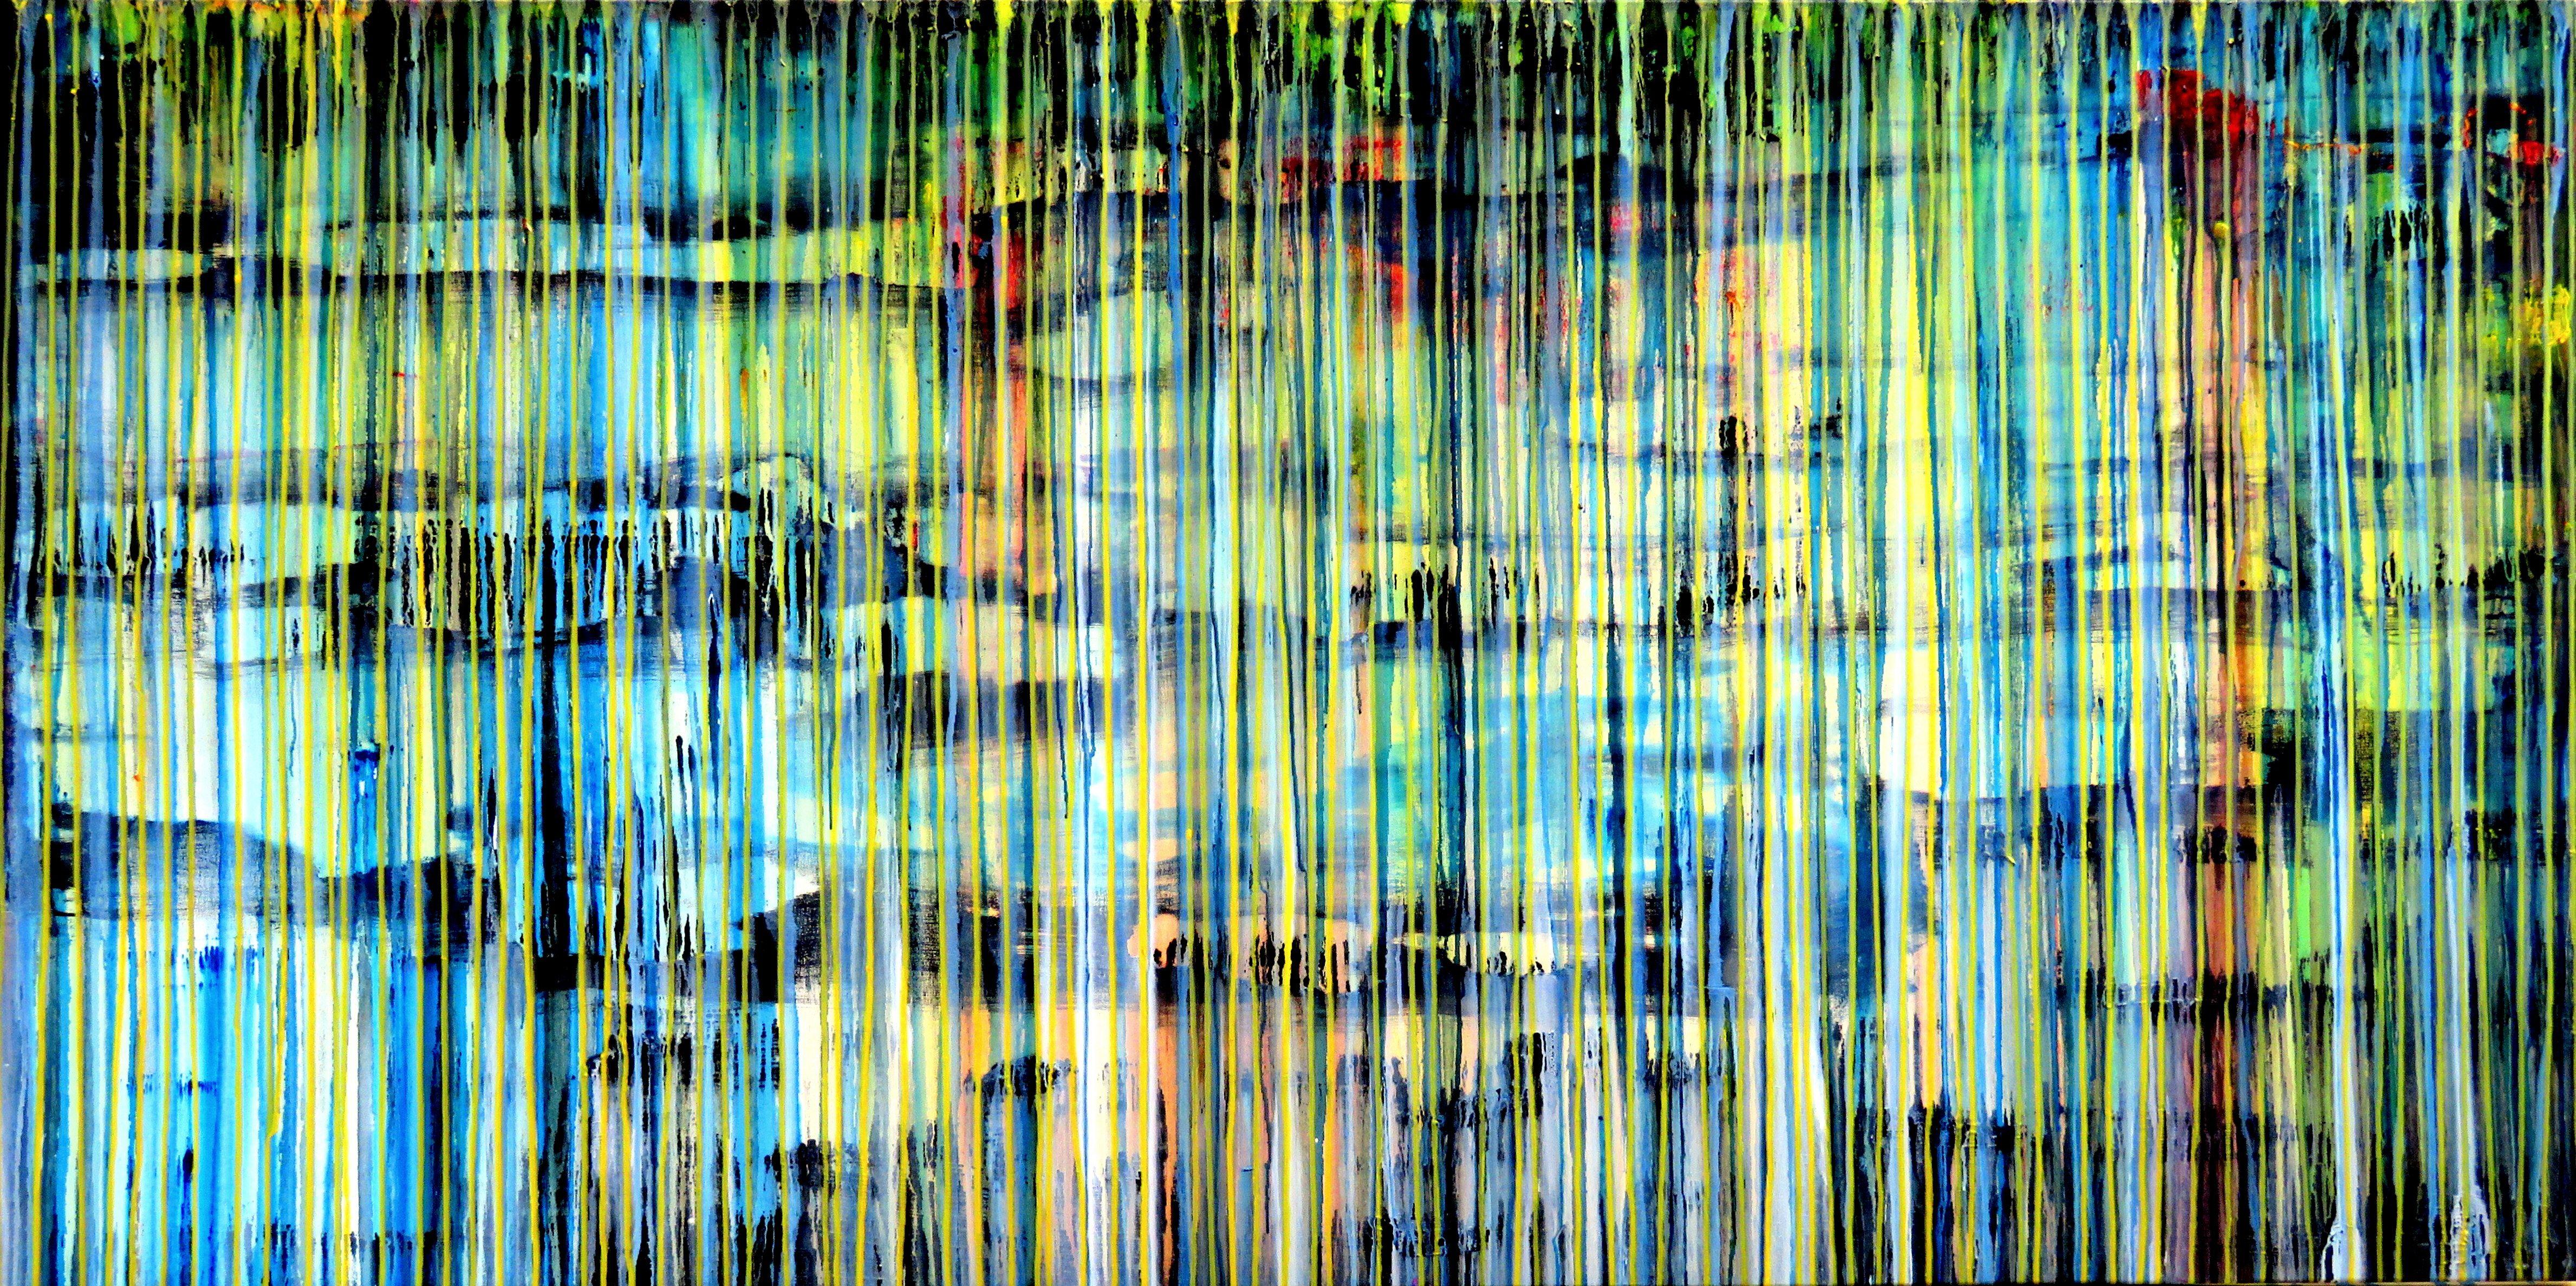 Carla Sá Fernandes Abstract Painting - The Emotional Creation #172, Painting, Acrylic on Canvas